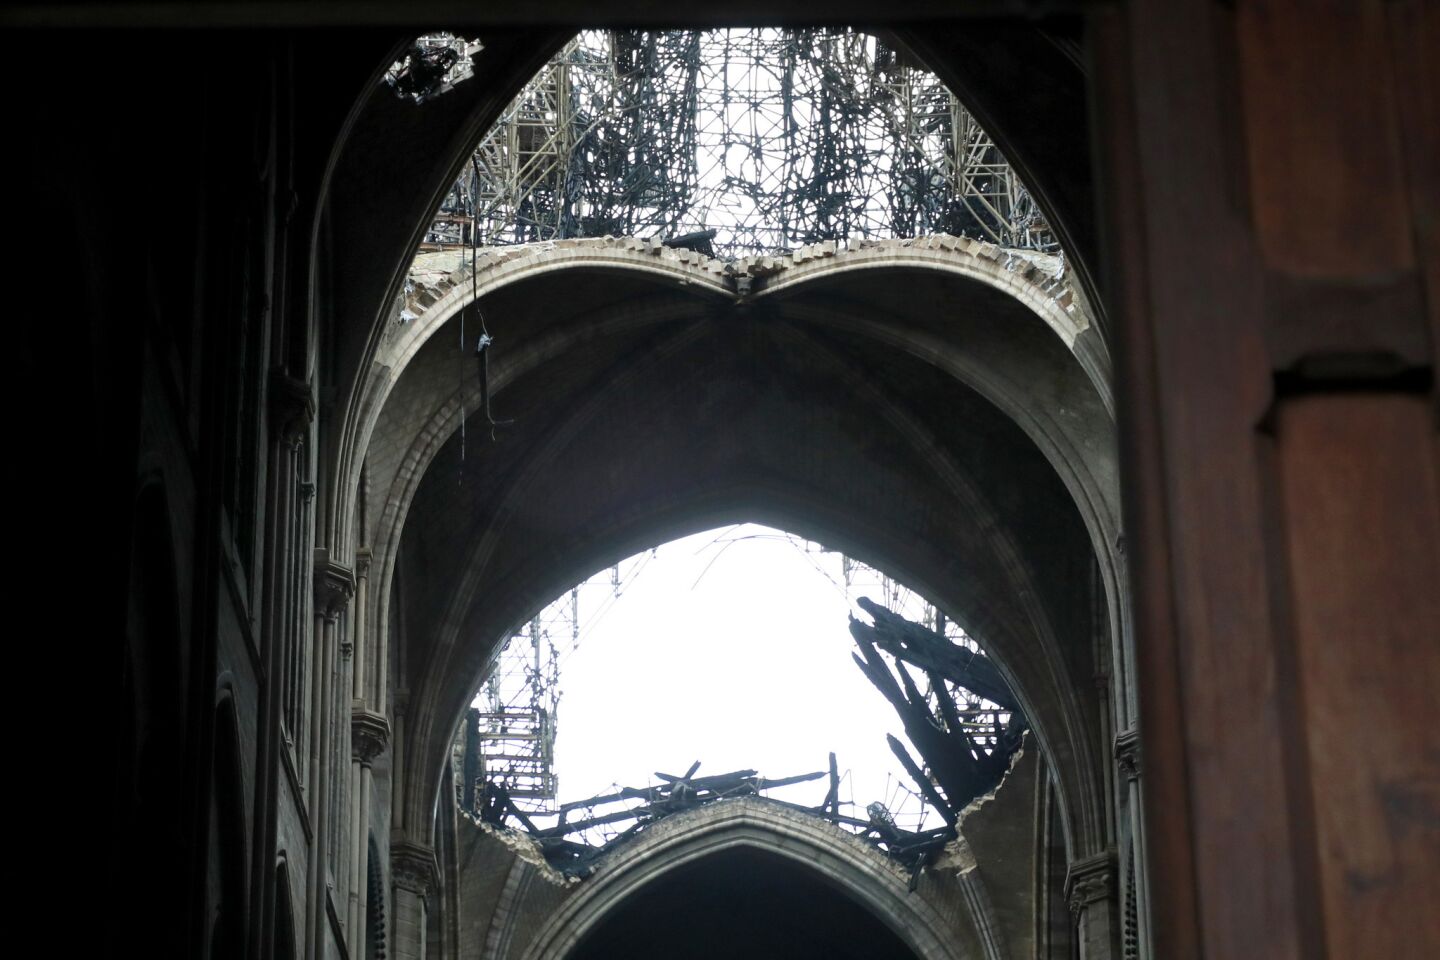 The fire at Notre Dame left a hole in the cathedral's dome.